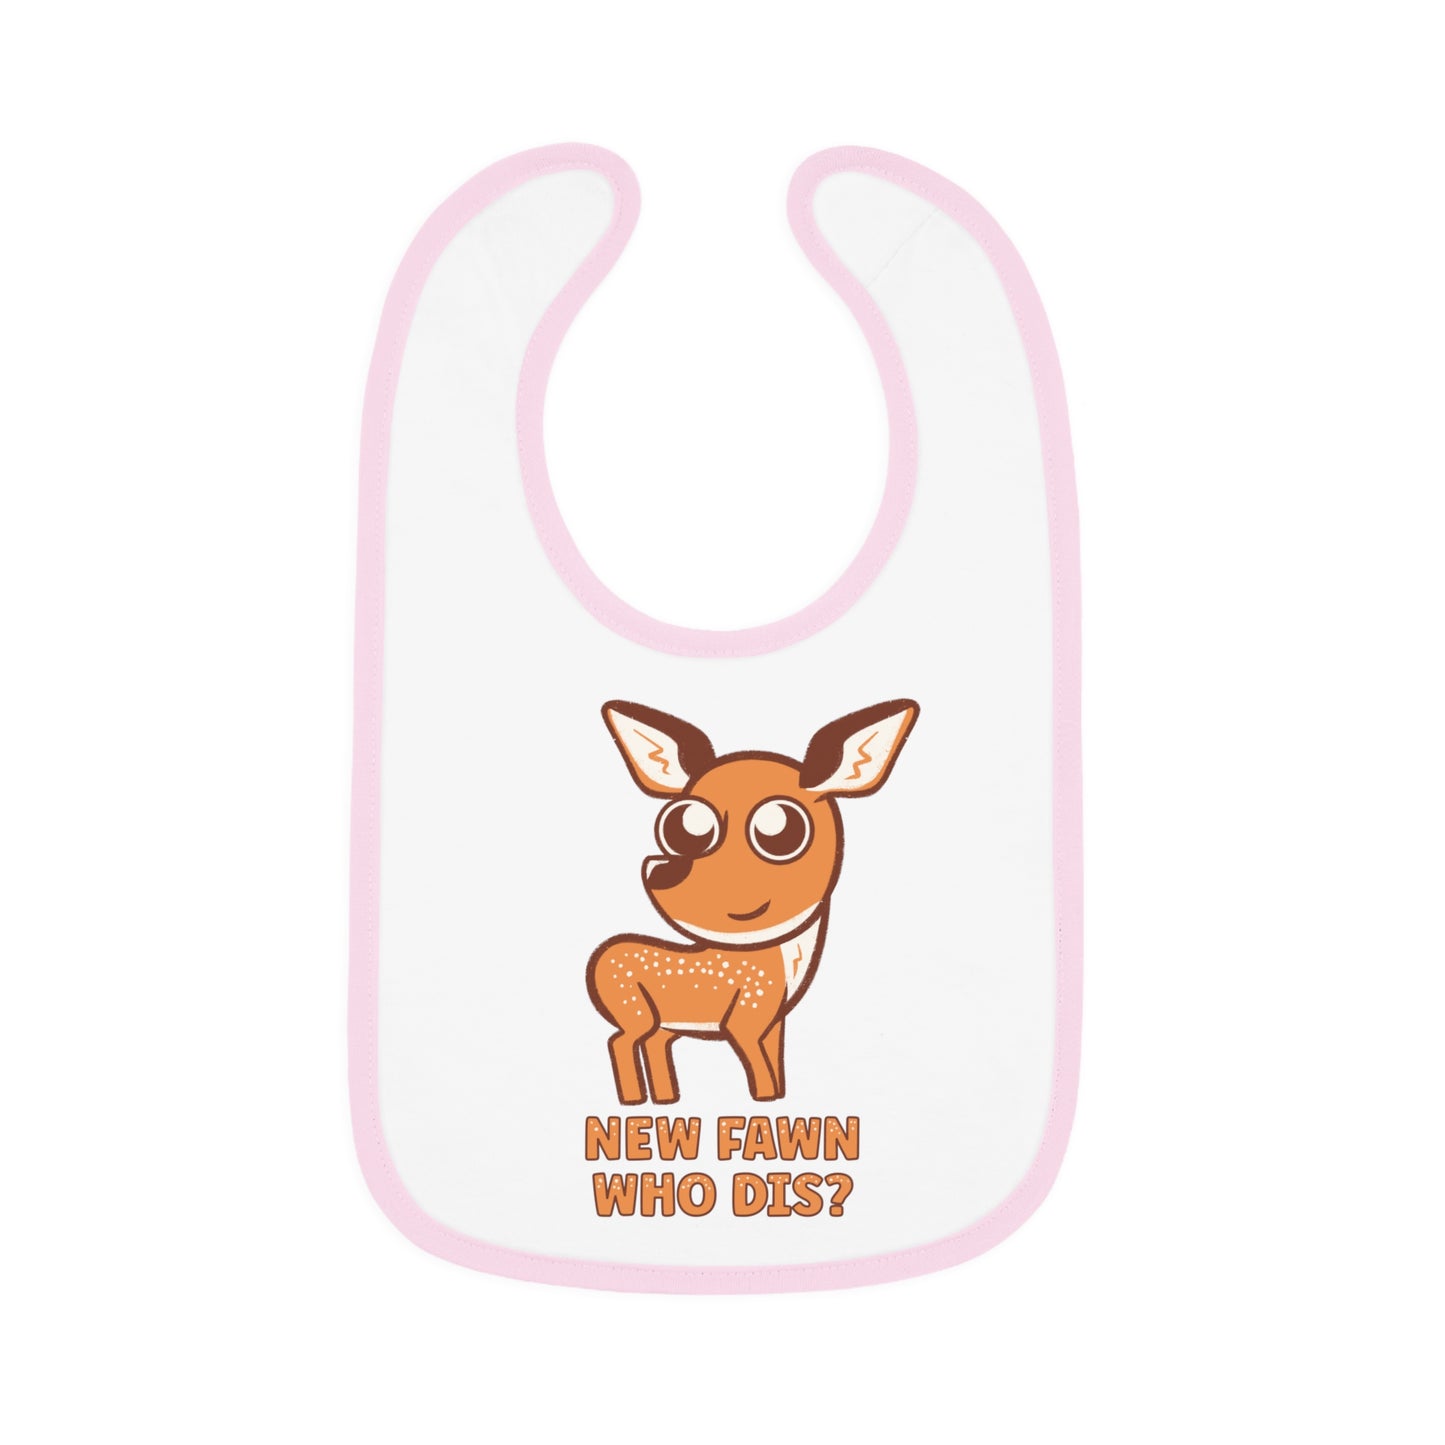 New Fawn Who Dis? - Cute Baby Deer Bib Gift for Newborn or New Parents